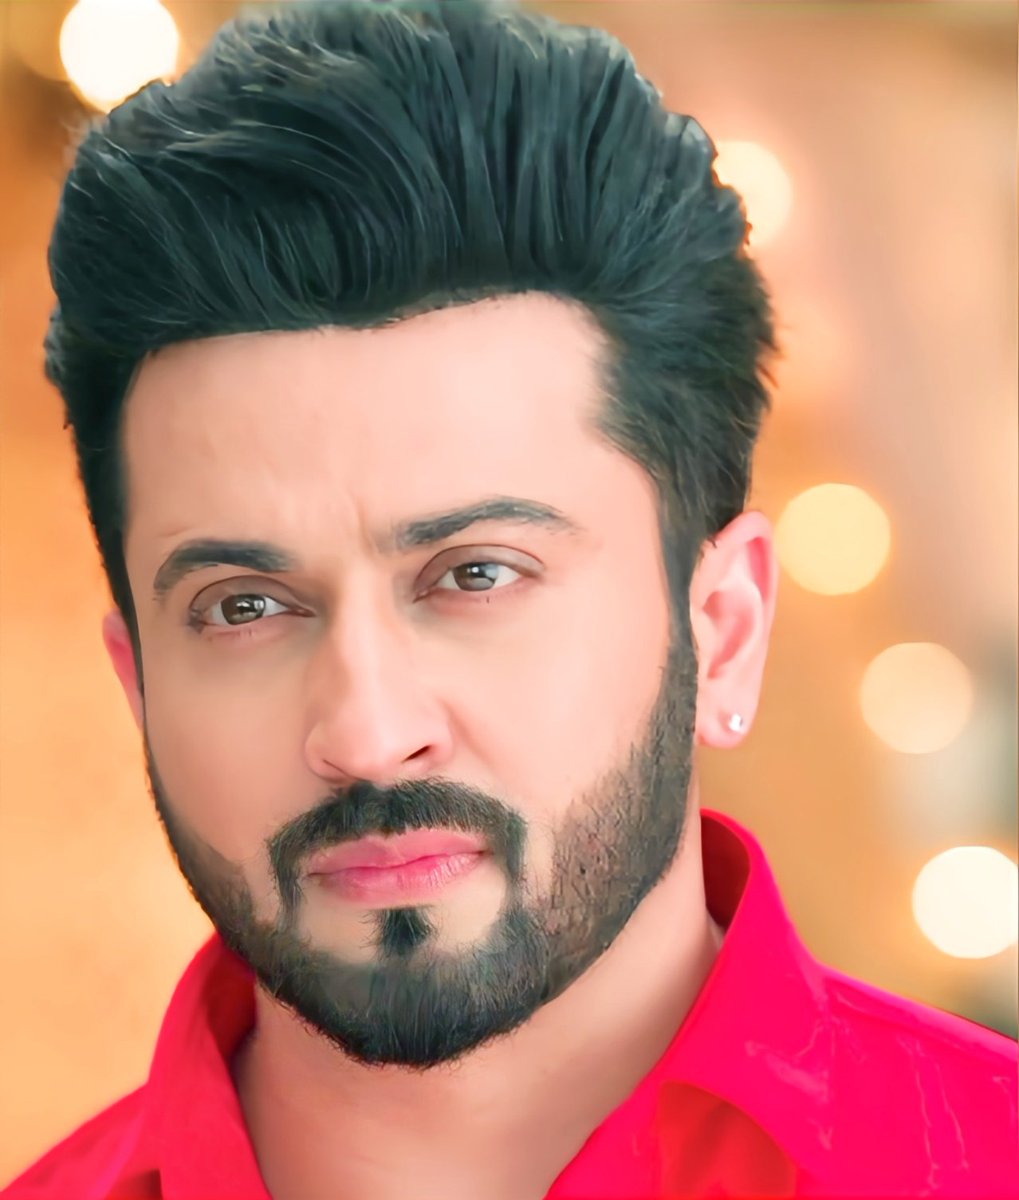 #SubhaanSiddiqui’s character is elevated by our #DheerajDhoopar's charismatic screen presence, which holds the audience's attention throughout the episode🙌❤
#RabbSeHaiDua